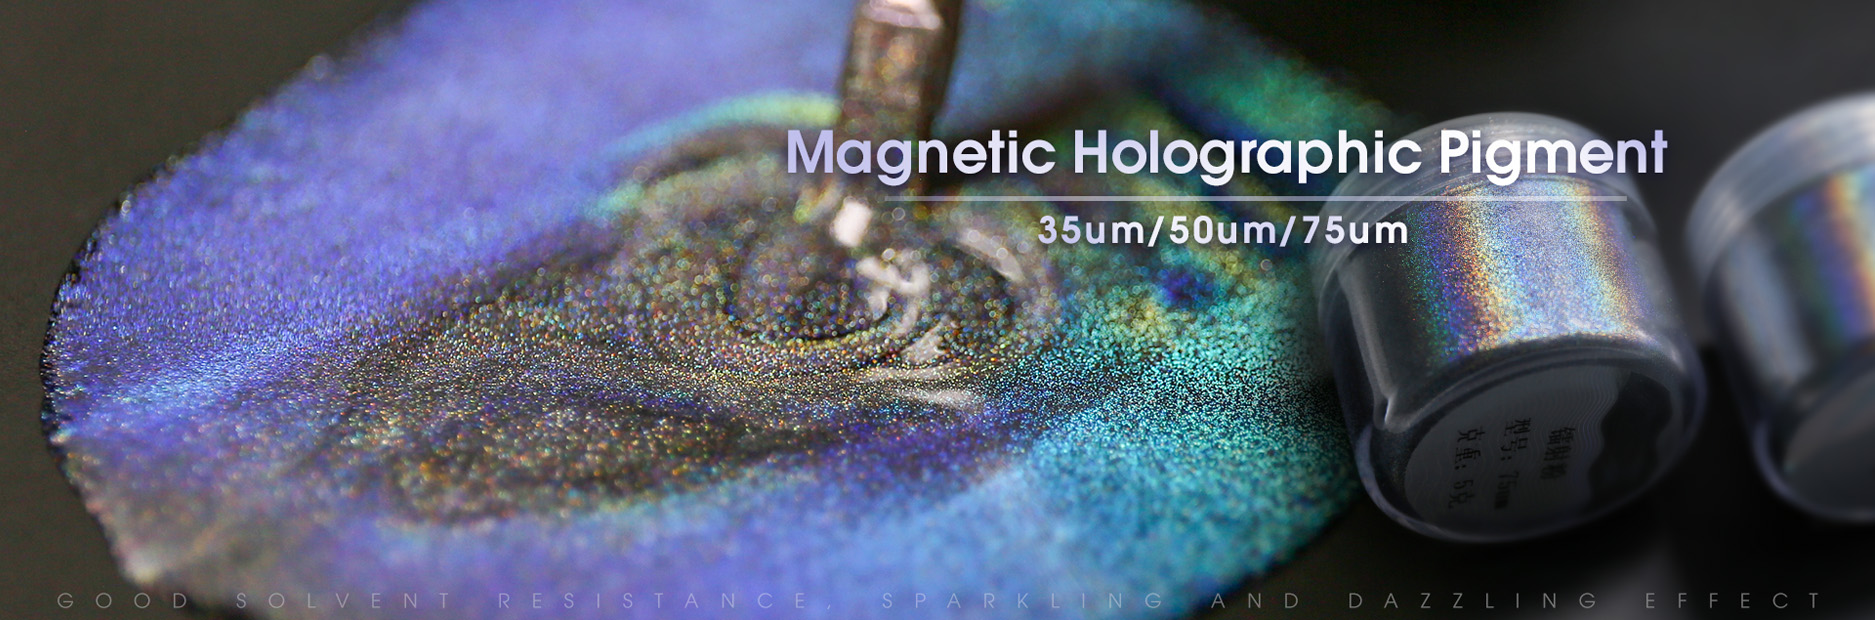 Dazzling Holographic Pigment with Great Magnetic Feature